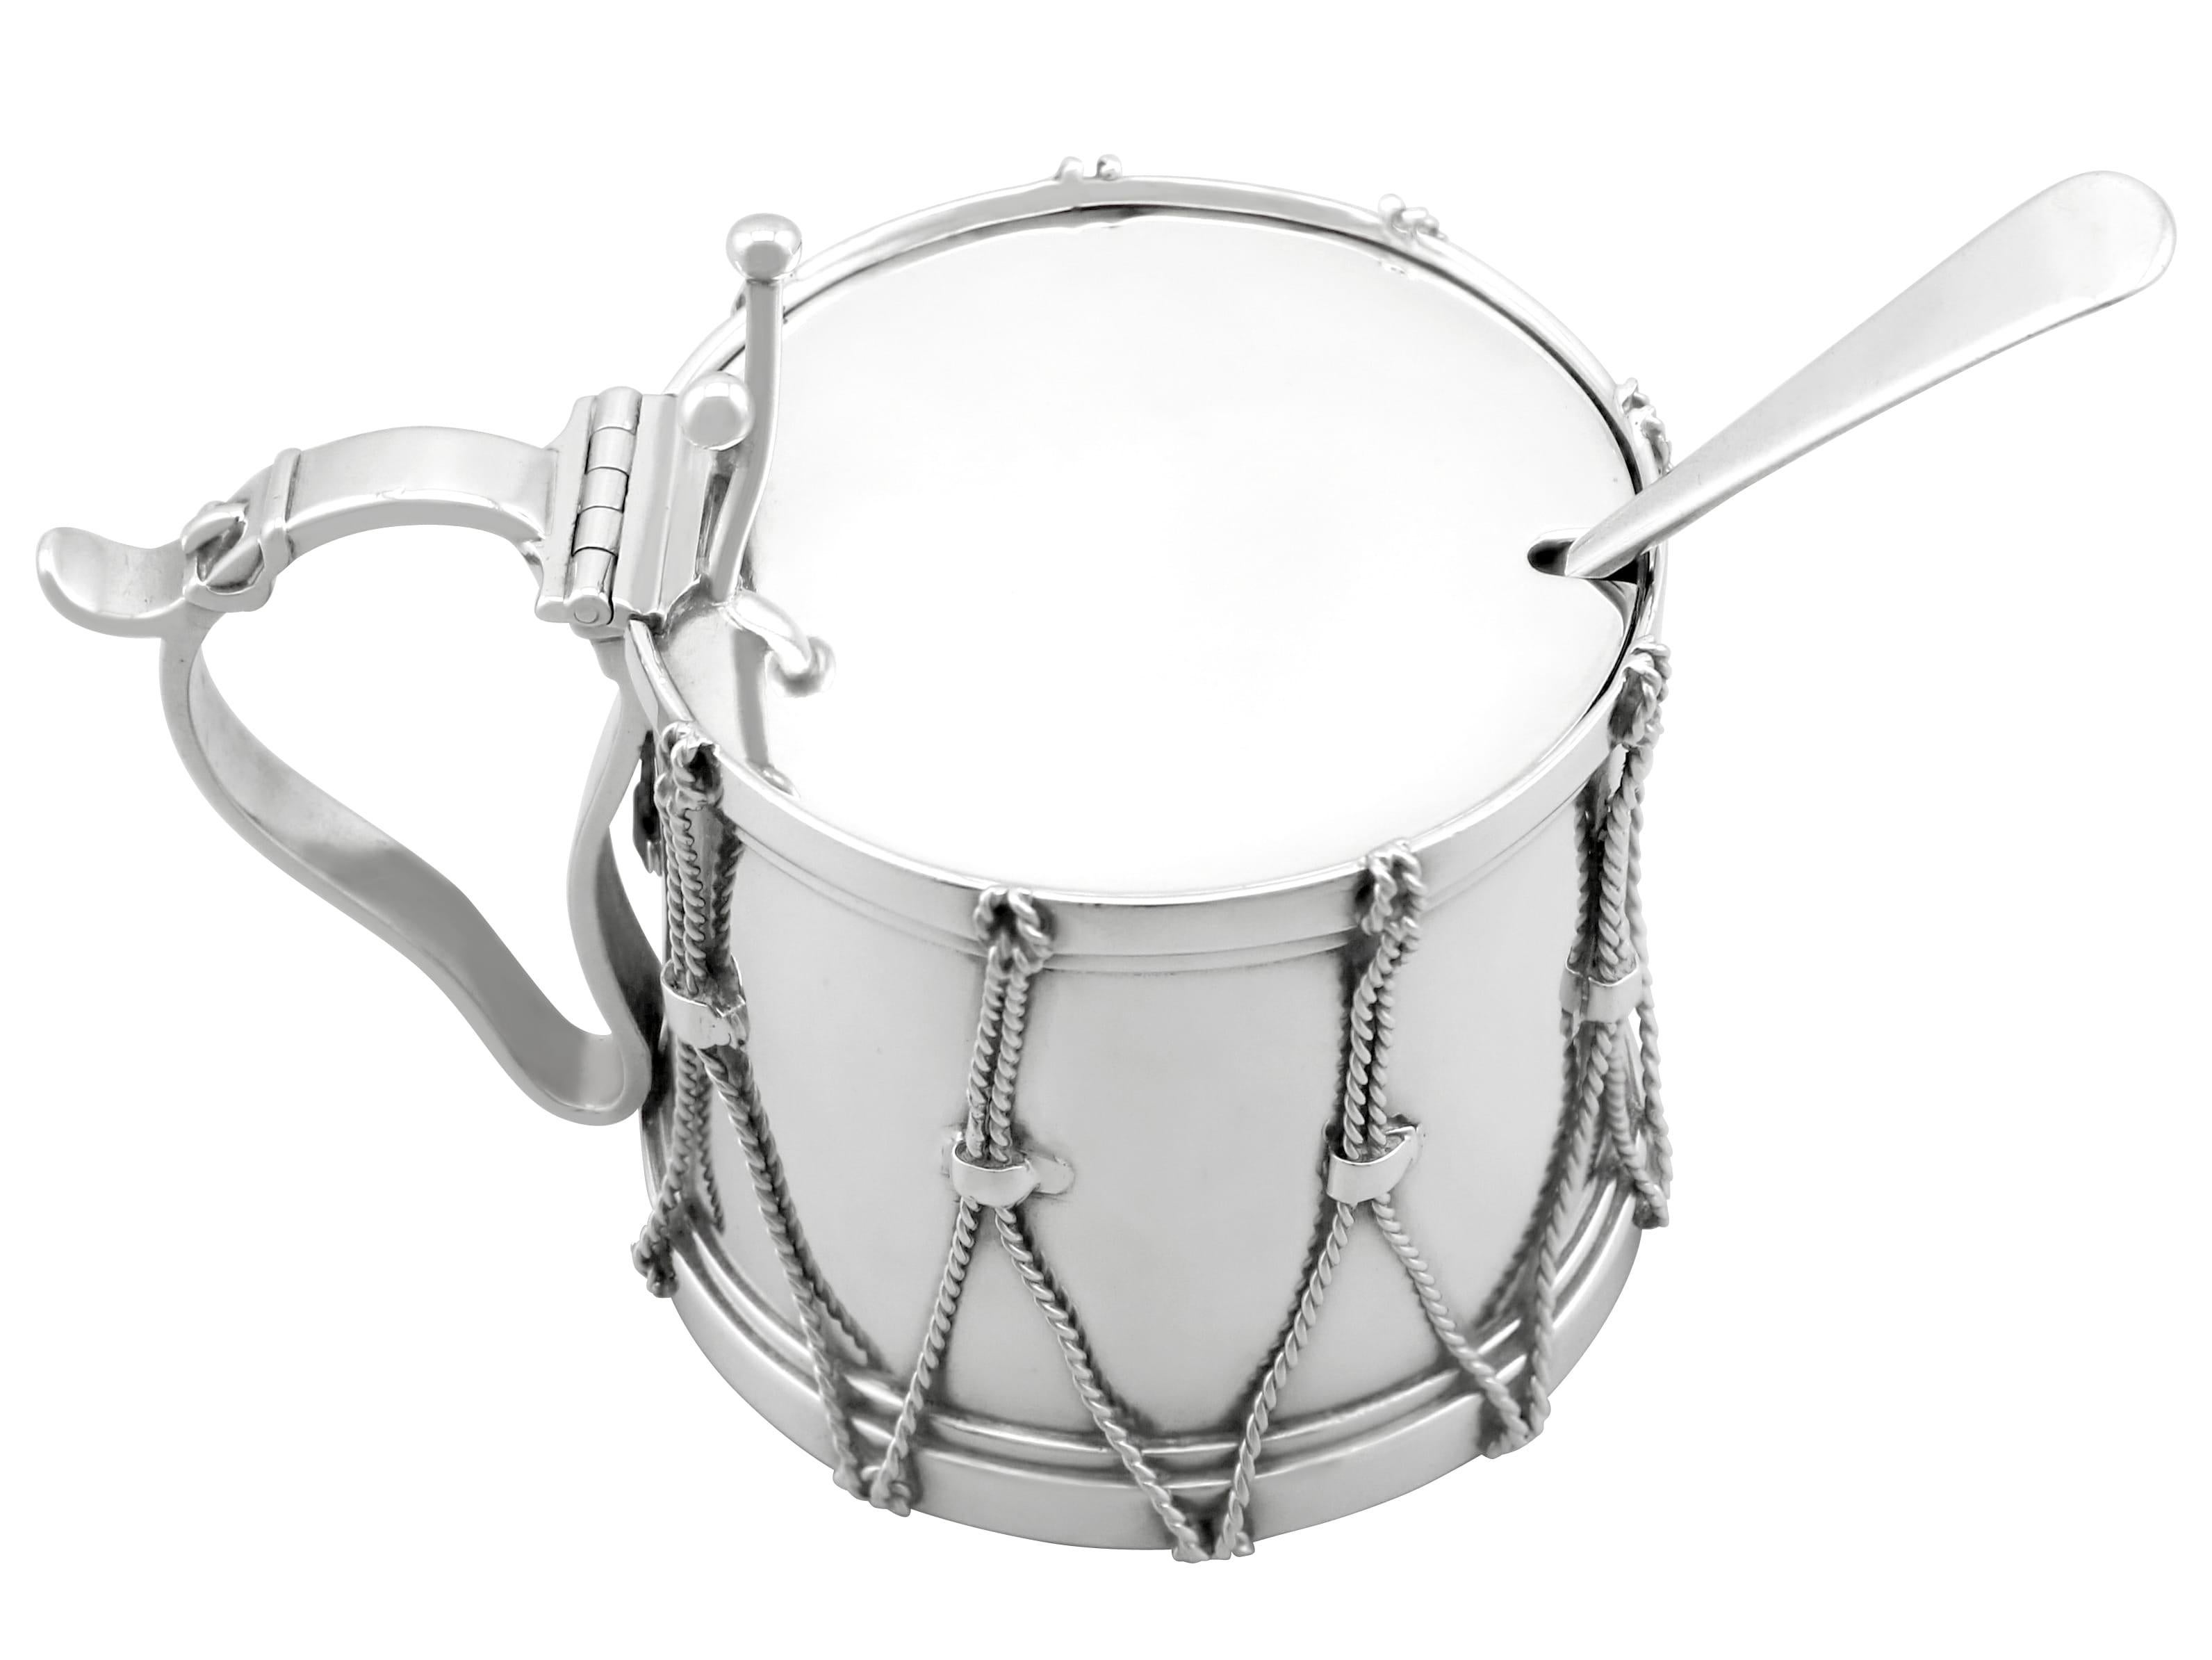 This exceptional and rare antique Victorian sterling silver mustard pot has been realistically modelled in the form of a drum.

The cylindrical body is embellished with cast and applied rope twist decoration accented with impressive belt strap